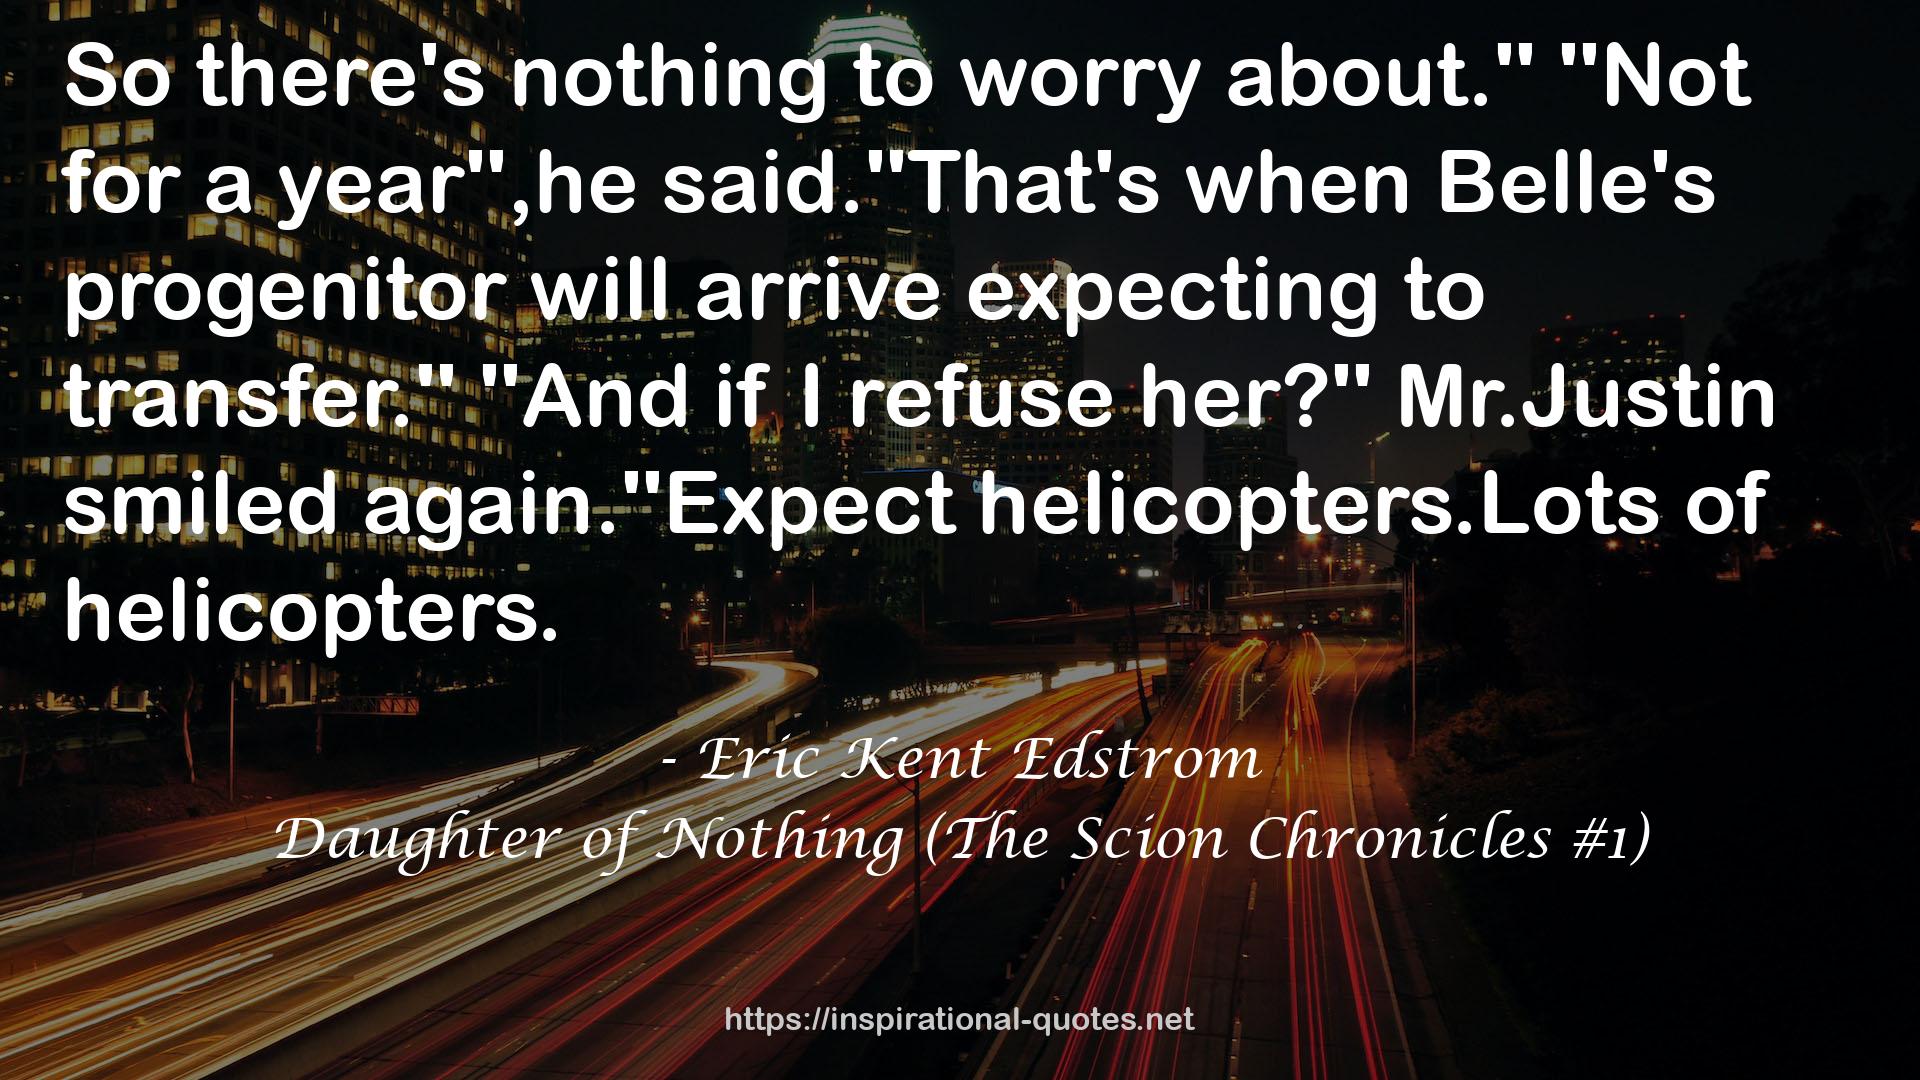 Daughter of Nothing (The Scion Chronicles #1) QUOTES